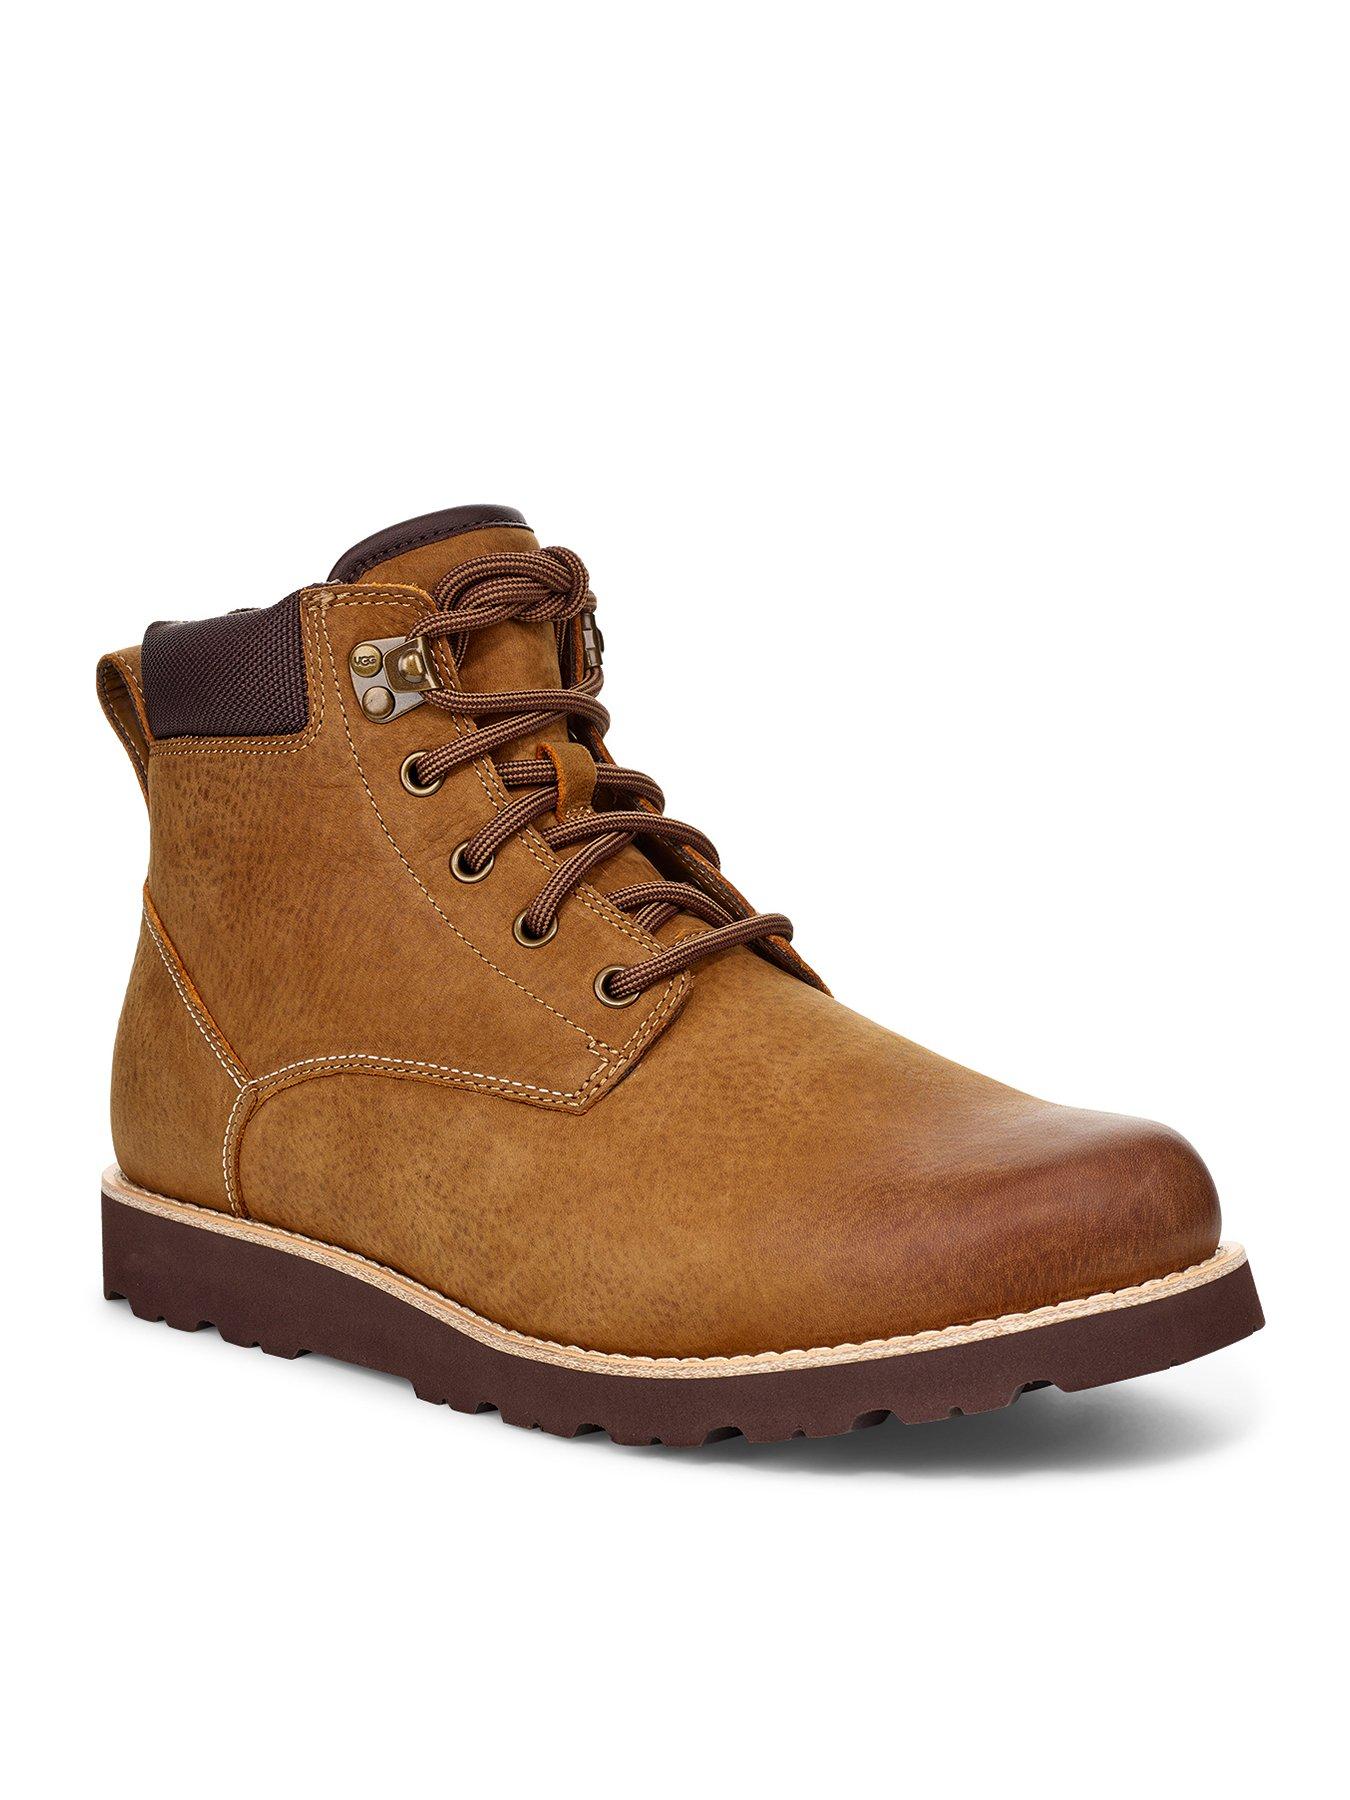 mens leather ugg boots uk